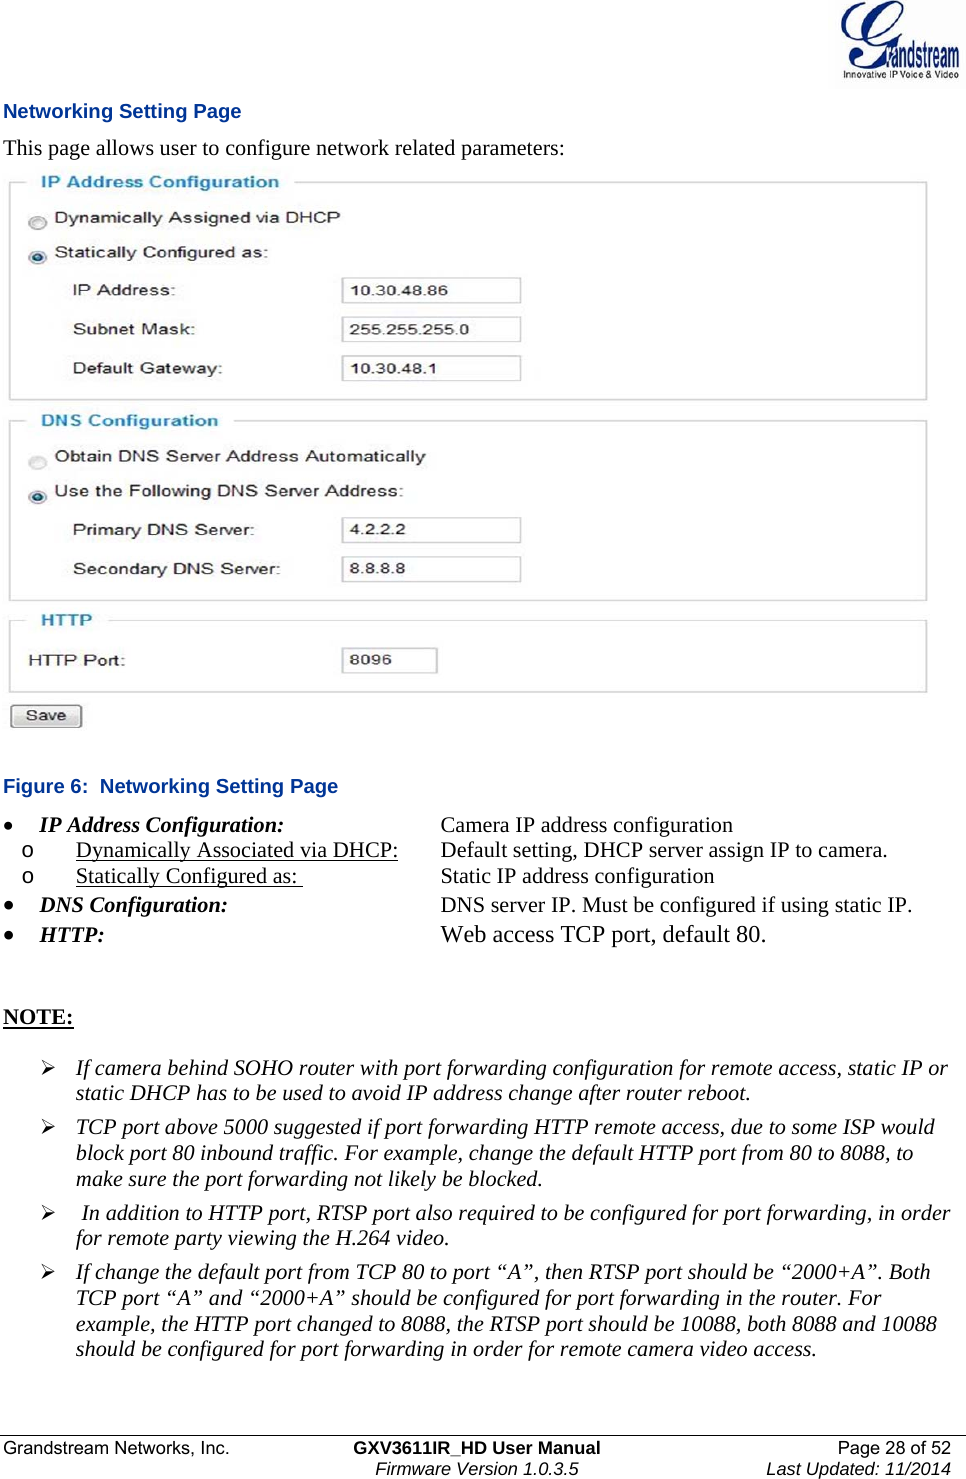  Grandstream Networks, Inc.  GXV3611IR_HD User Manual  Page 28 of 52    Firmware Version 1.0.3.5  Last Updated: 11/2014 Networking Setting Page This page allows user to configure network related parameters:  Figure 6:  Networking Setting Page  IP Address Configuration:      Camera IP address configuration o Dynamically Associated via DHCP:   Default setting, DHCP server assign IP to camera. o Statically Configured as:     Static IP address configuration  DNS Configuration:       DNS server IP. Must be configured if using static IP.   HTTP:           Web access TCP port, default 80.    NOTE:    If camera behind SOHO router with port forwarding configuration for remote access, static IP or static DHCP has to be used to avoid IP address change after router reboot.   TCP port above 5000 suggested if port forwarding HTTP remote access, due to some ISP would block port 80 inbound traffic. For example, change the default HTTP port from 80 to 8088, to make sure the port forwarding not likely be blocked.    In addition to HTTP port, RTSP port also required to be configured for port forwarding, in order for remote party viewing the H.264 video.   If change the default port from TCP 80 to port “A”, then RTSP port should be “2000+A”. Both TCP port “A” and “2000+A” should be configured for port forwarding in the router. For example, the HTTP port changed to 8088, the RTSP port should be 10088, both 8088 and 10088 should be configured for port forwarding in order for remote camera video access.  